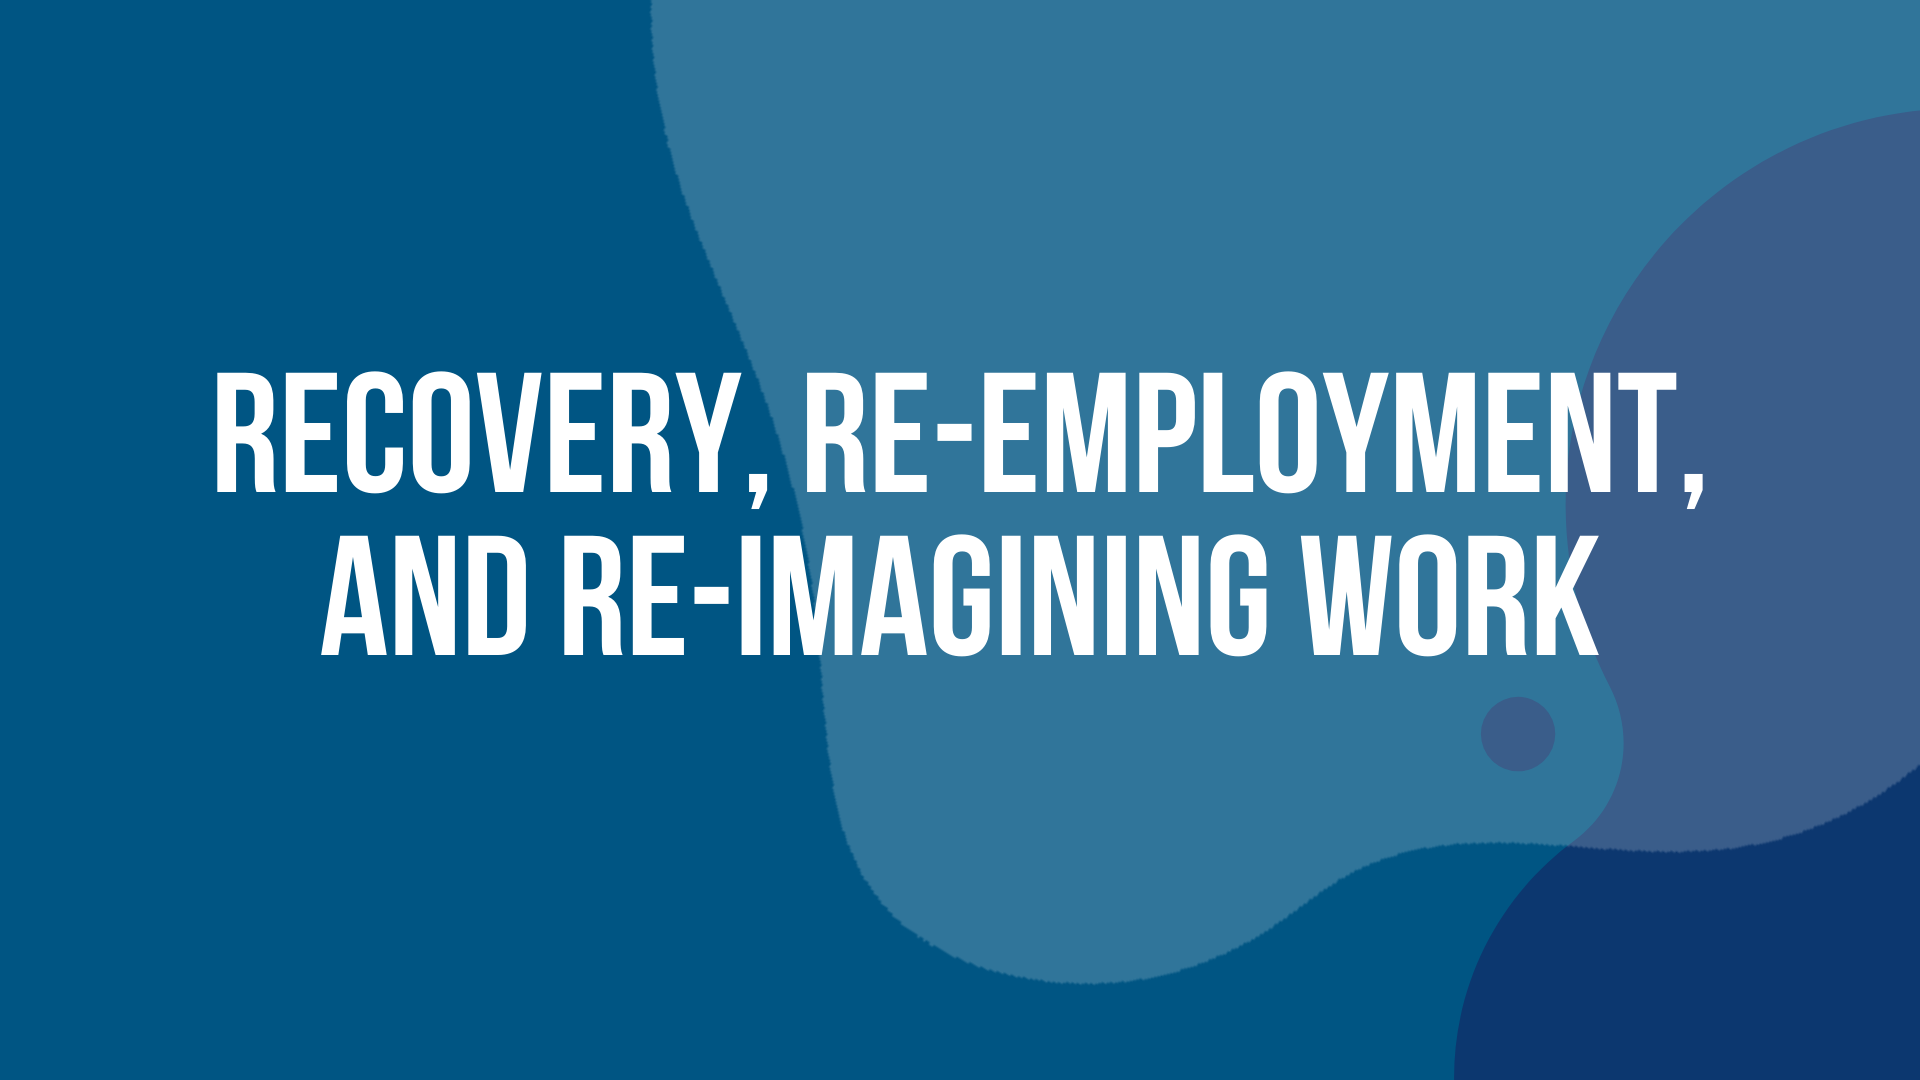 Recovery, Re-Employment, and Re-Imagining Work